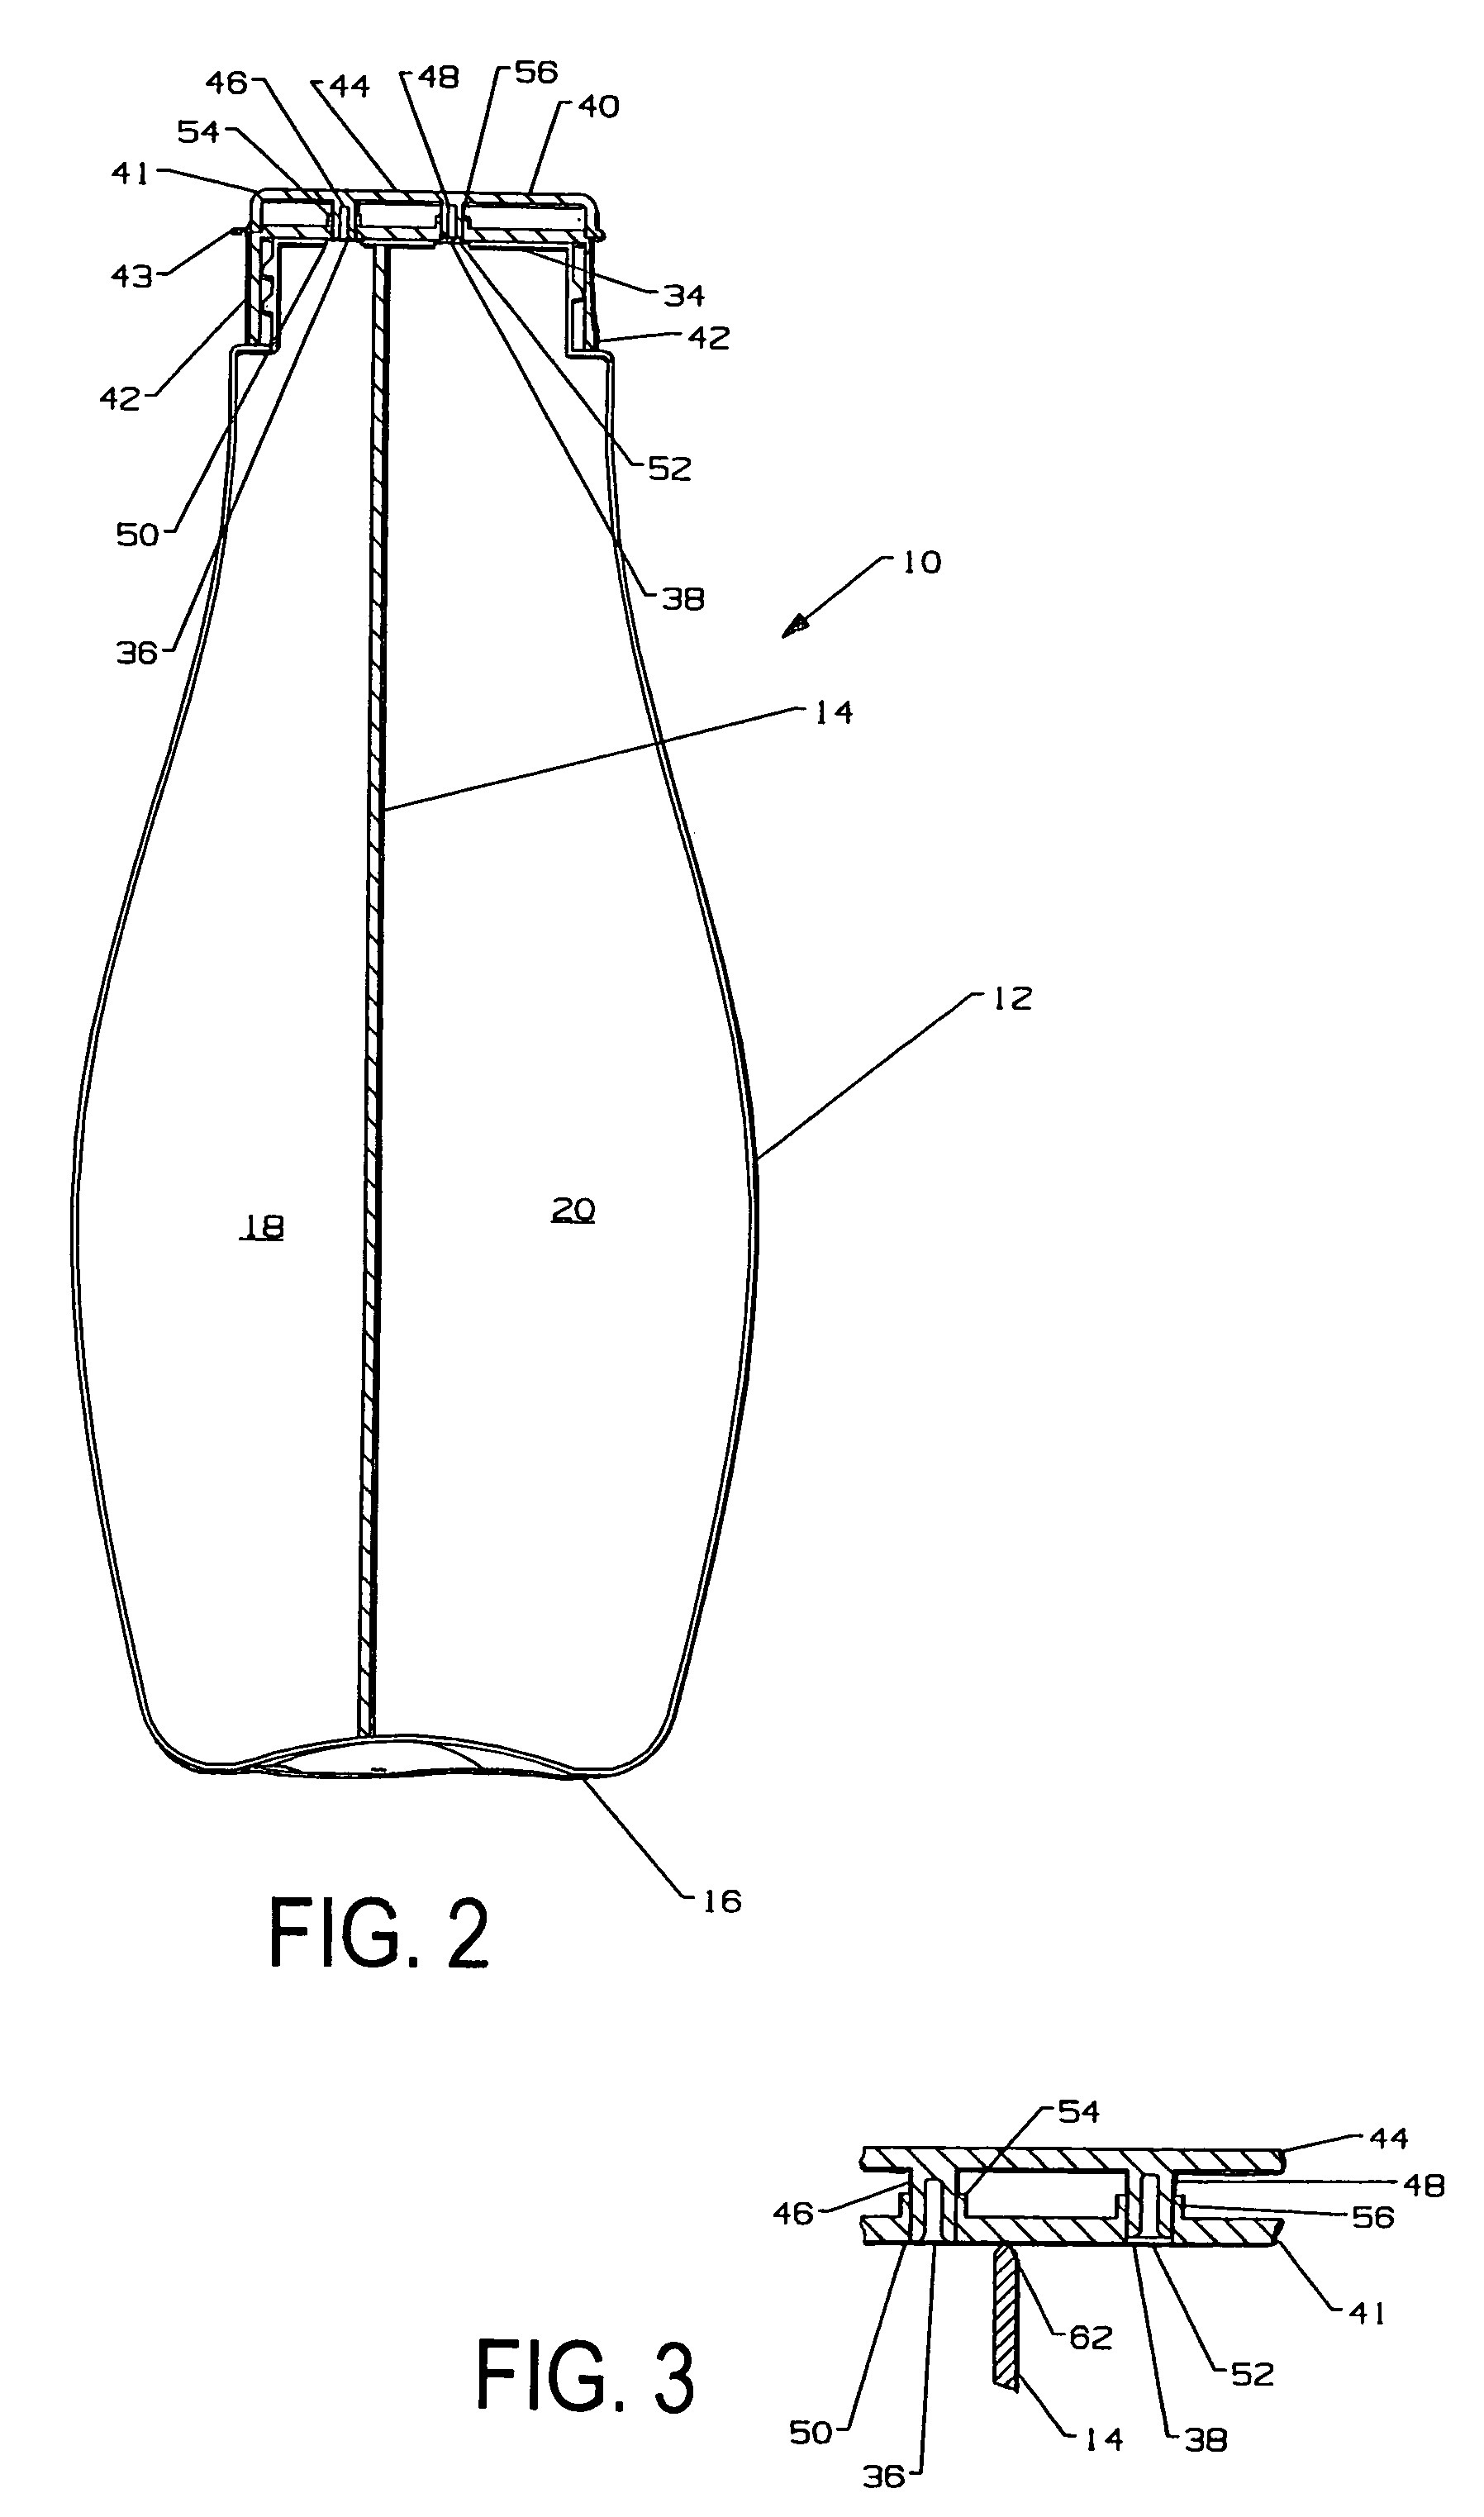 Diagonally divided bottle with curved line of division distinct from edge curve